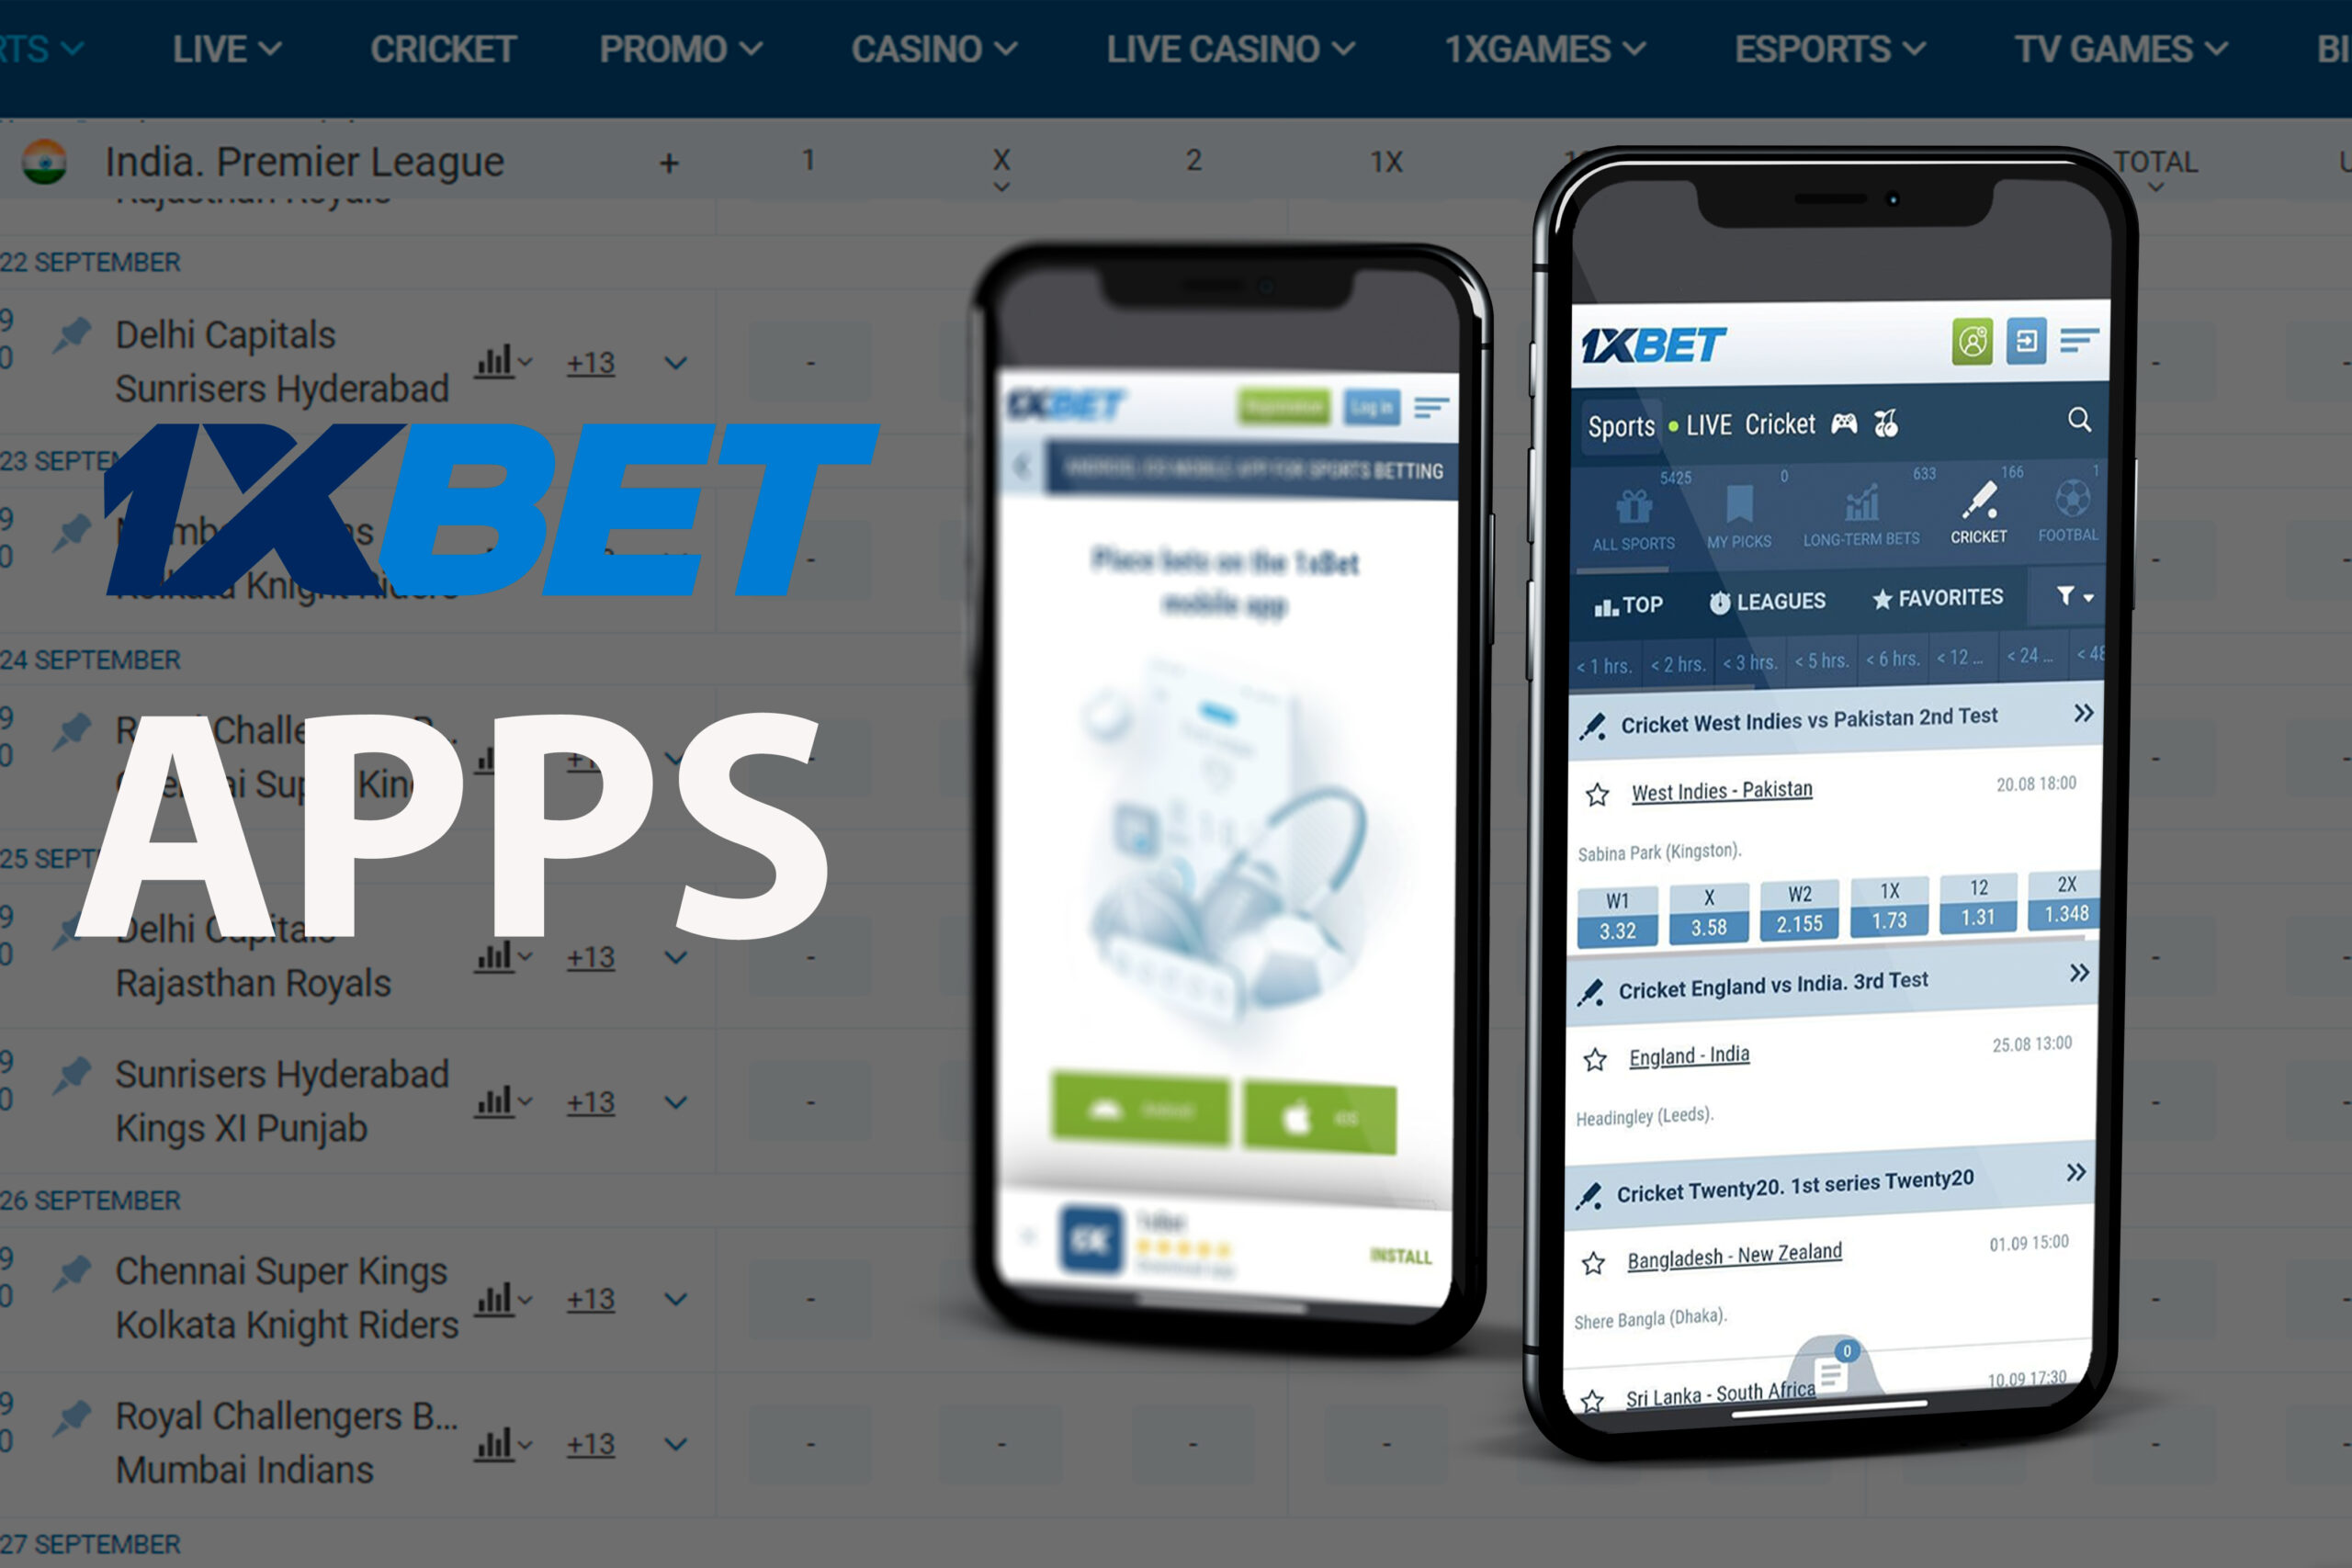 You can also place you bets on cricket via our Android and iOS apps.